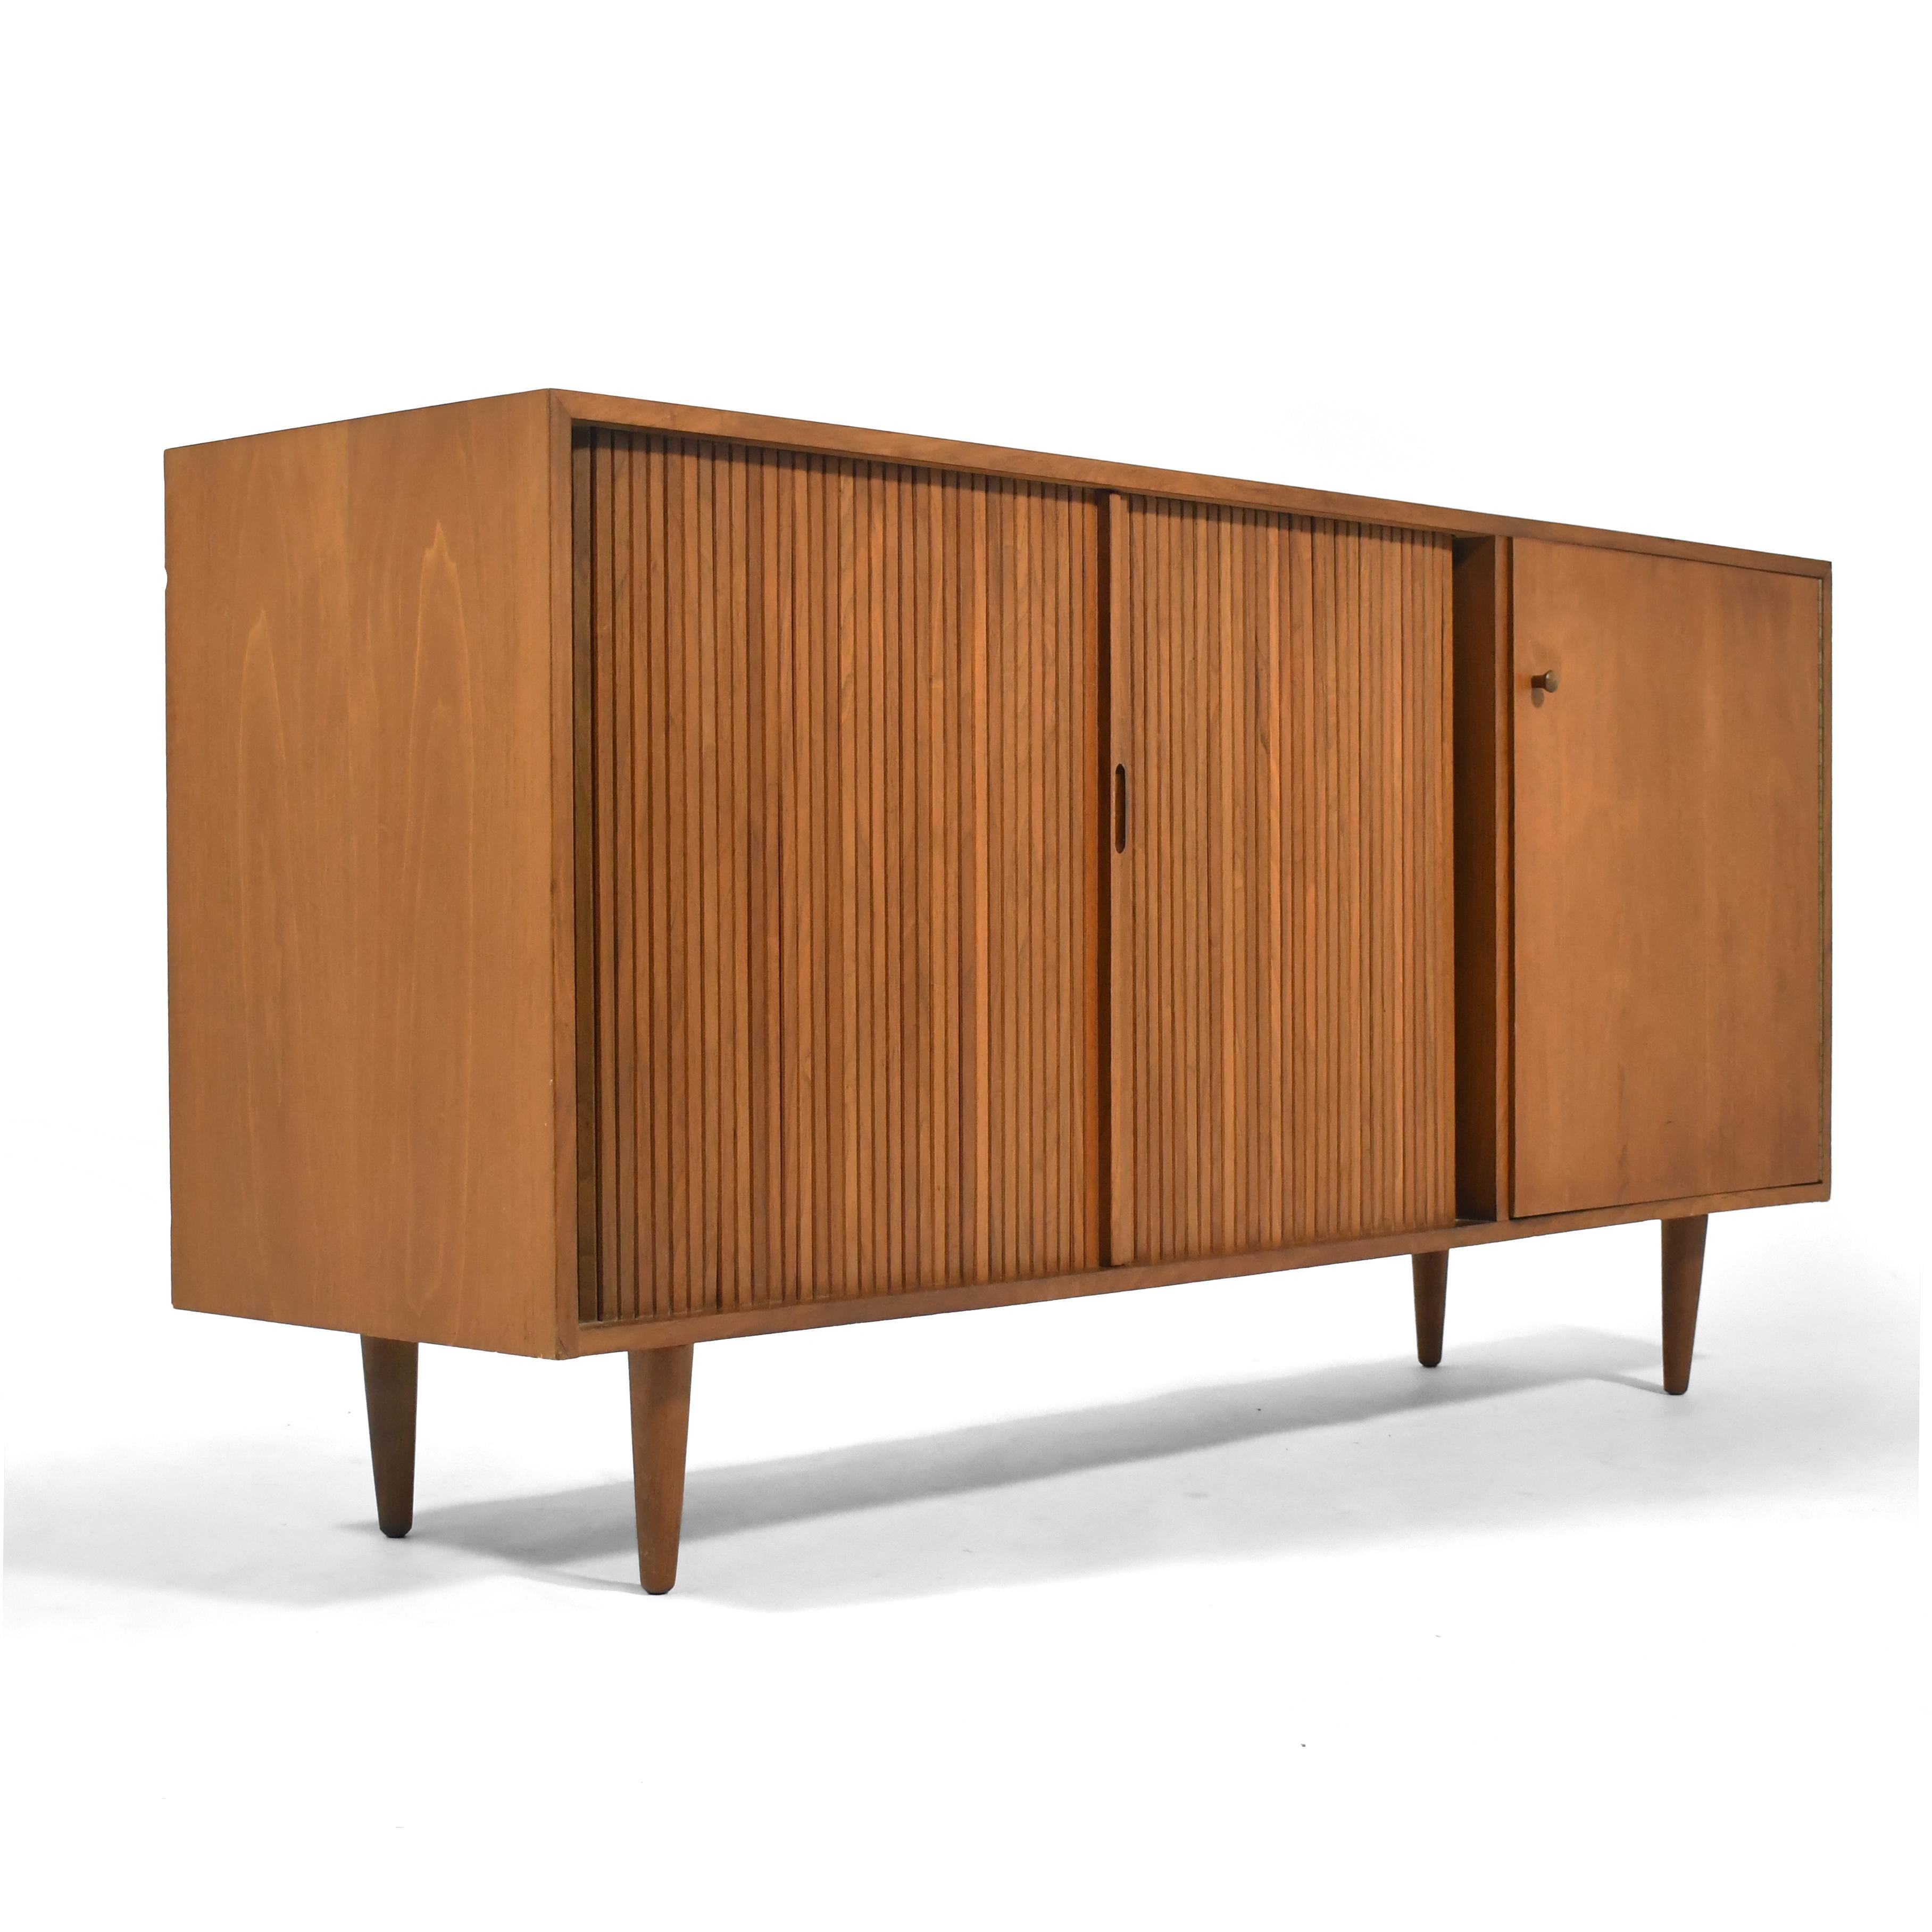 This walnut cabinet designed by Milo Baughman for Glenn of California is handsome and highly functional. The asymmetrical arrangement is very attractive. It has a single door which conceals a shallow drawer, a shelf, and two vertical storage